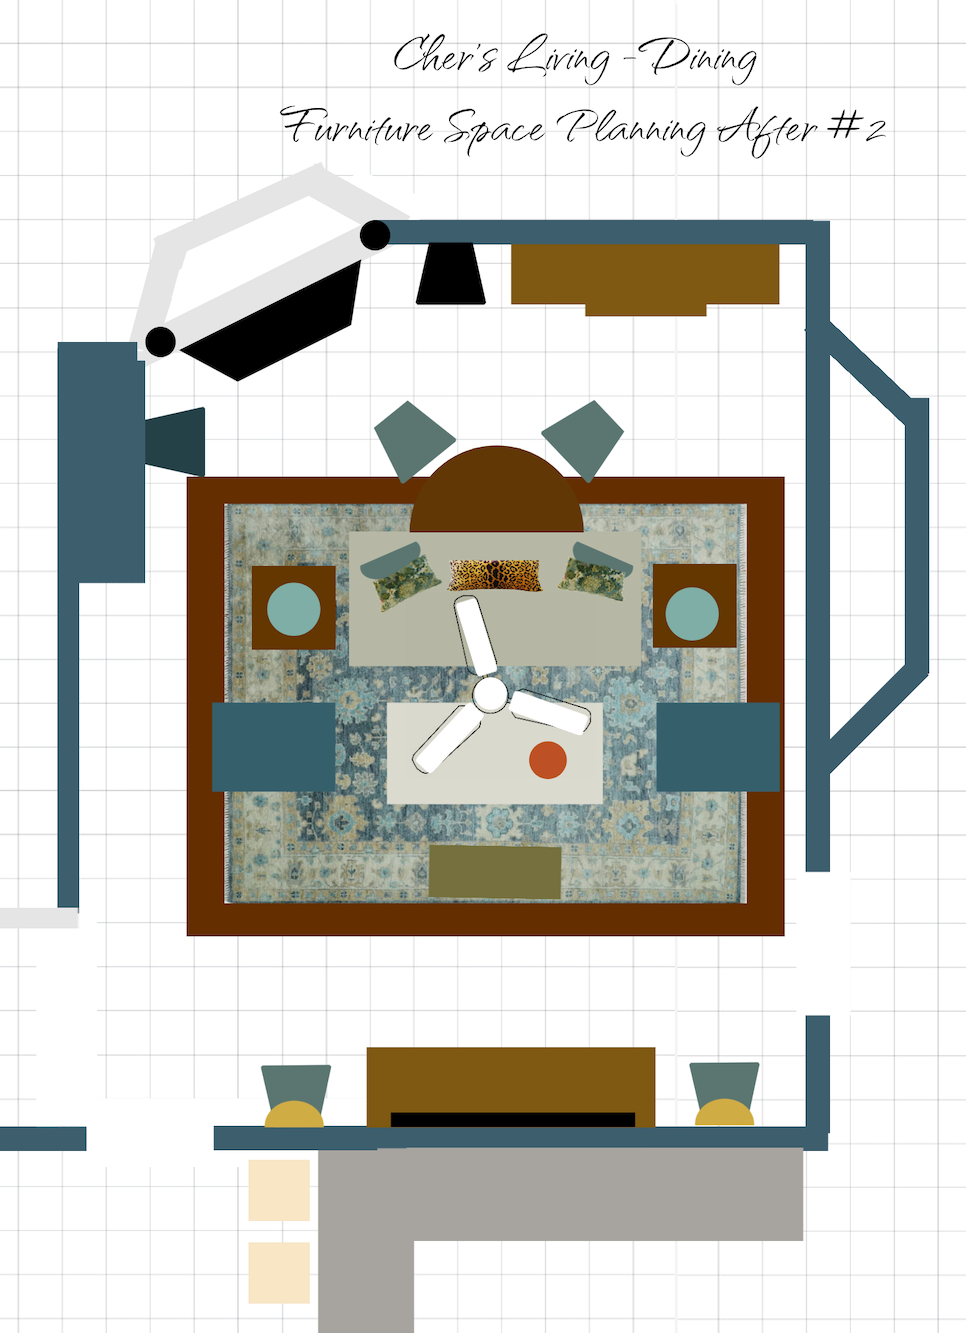 Cher's living dining room layout #2 with space planning